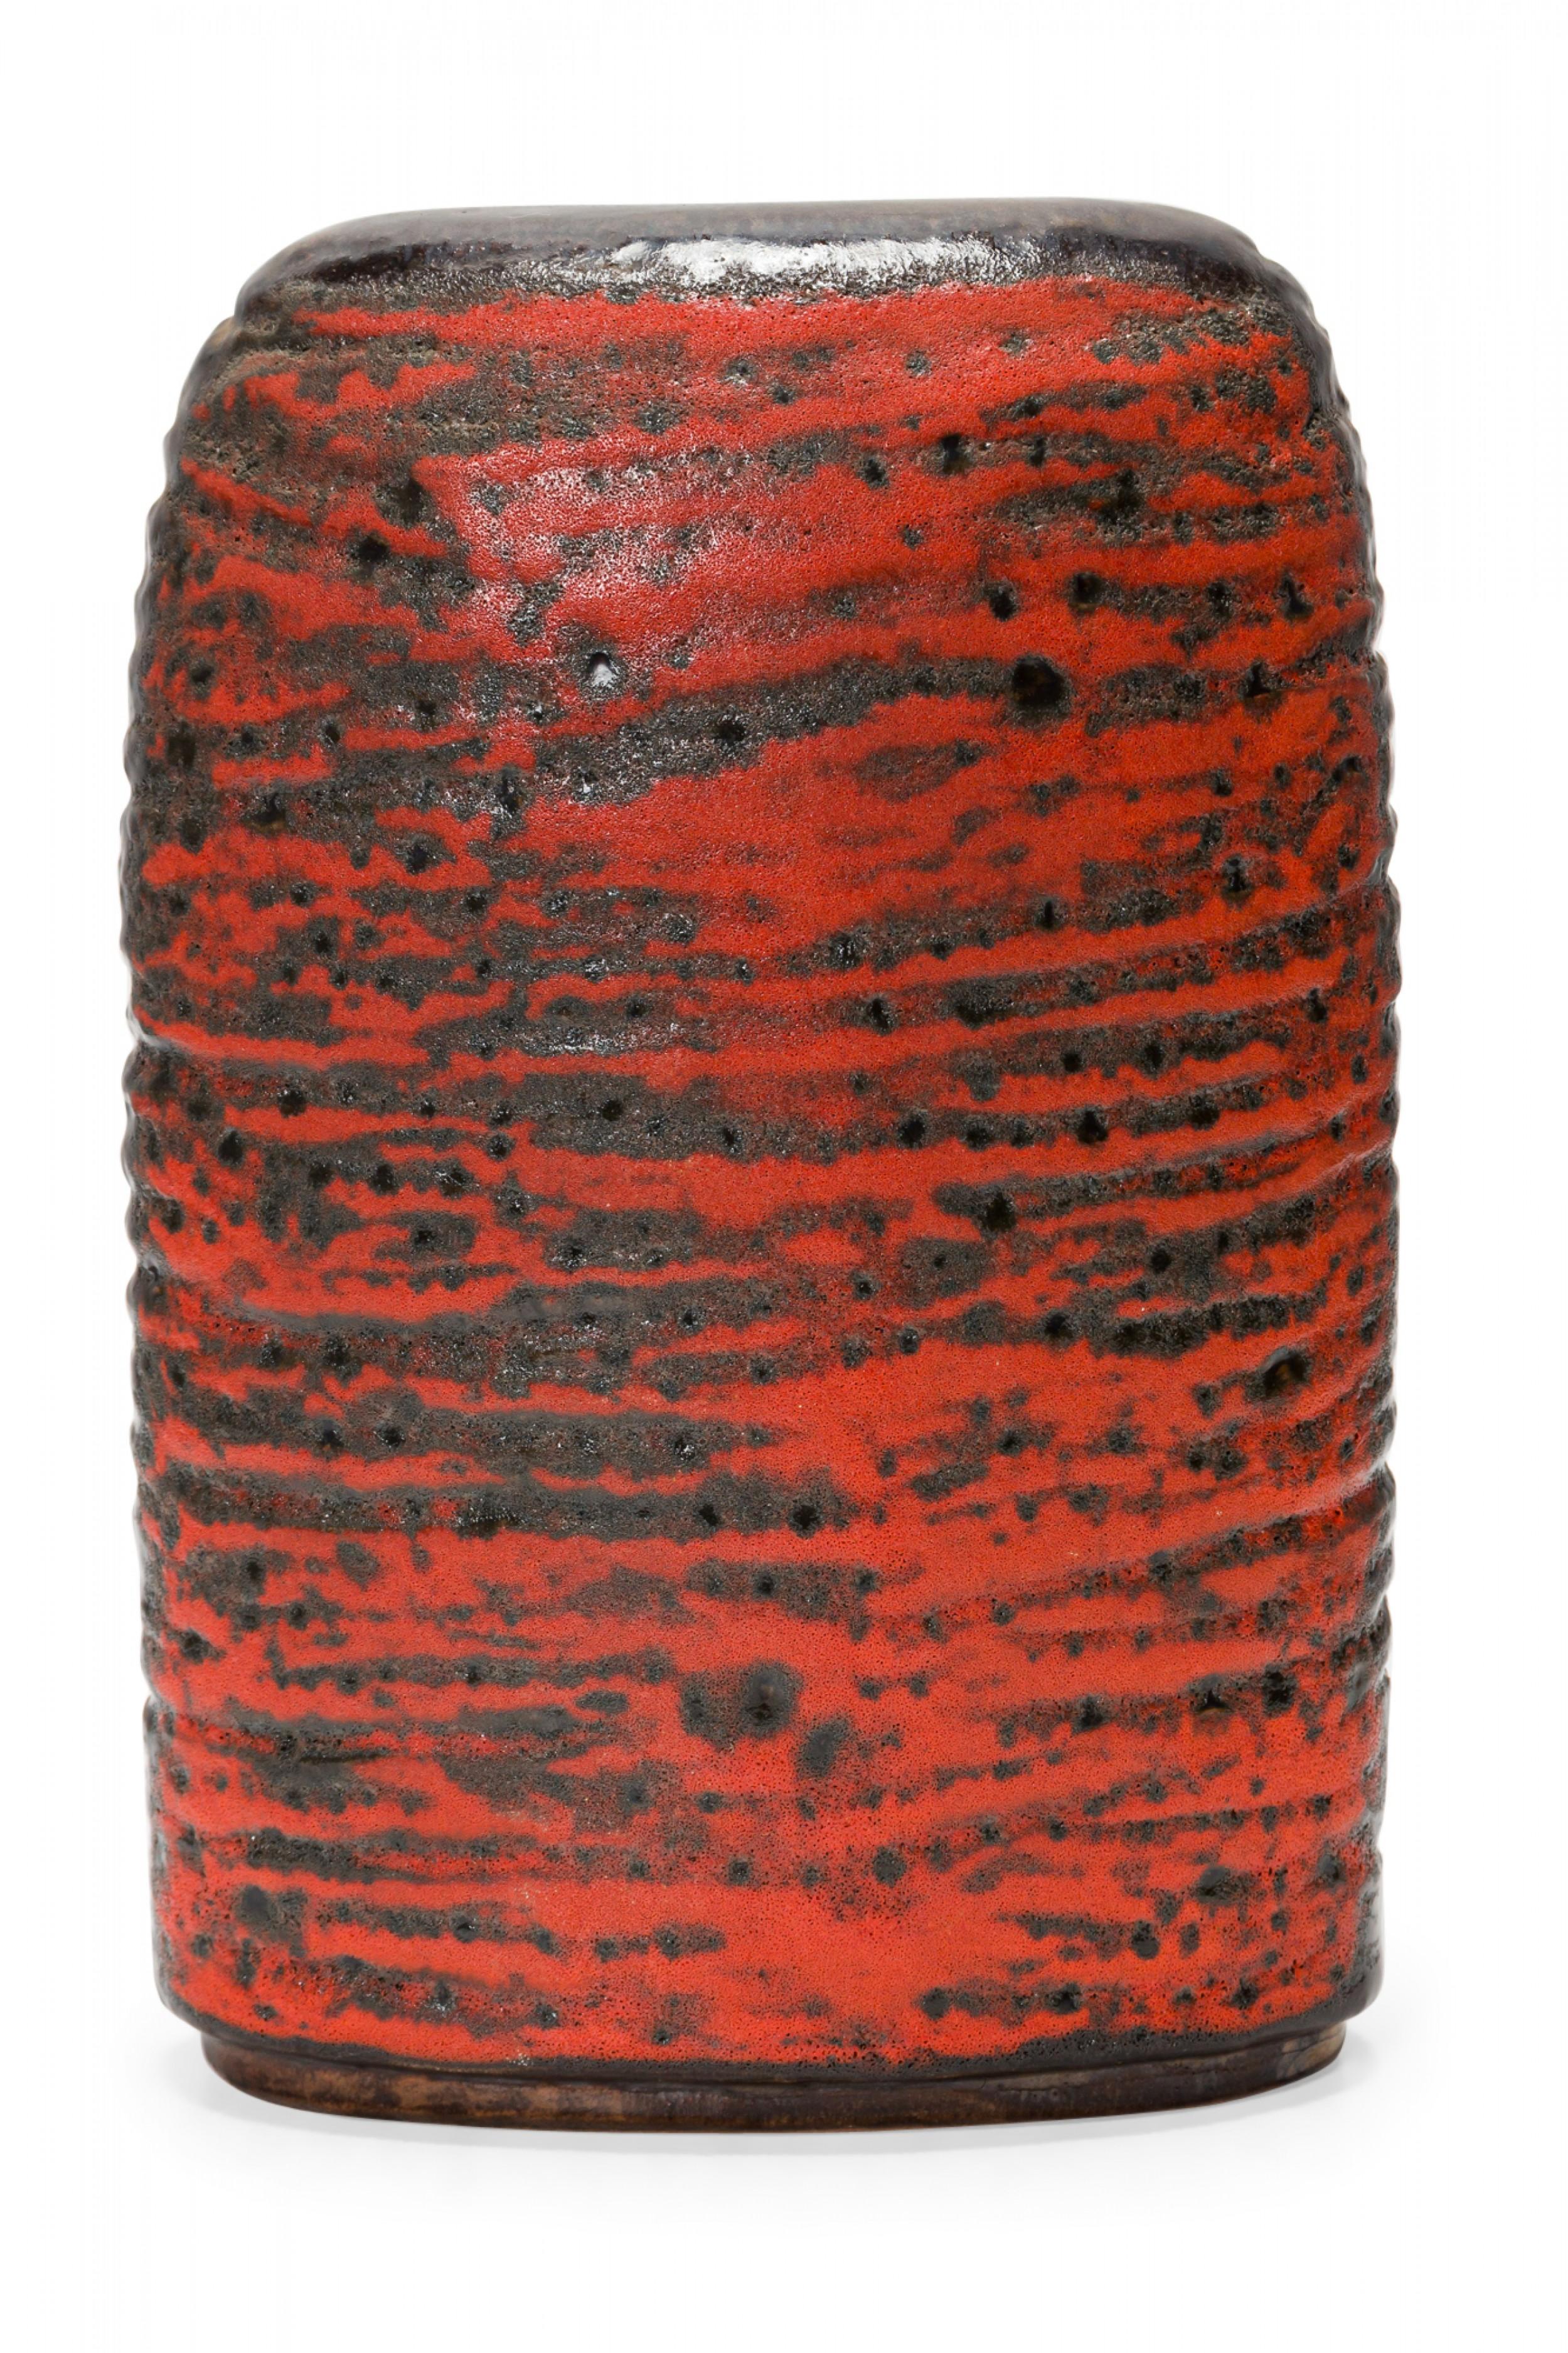 West German mid-century two-lobed form ceramic vasew with an abstract striped orange and black fat lava glaze. (mark on bottom for CARSTENS OF TÖNNIESHOF, W. GERMANY 0563-23).
     